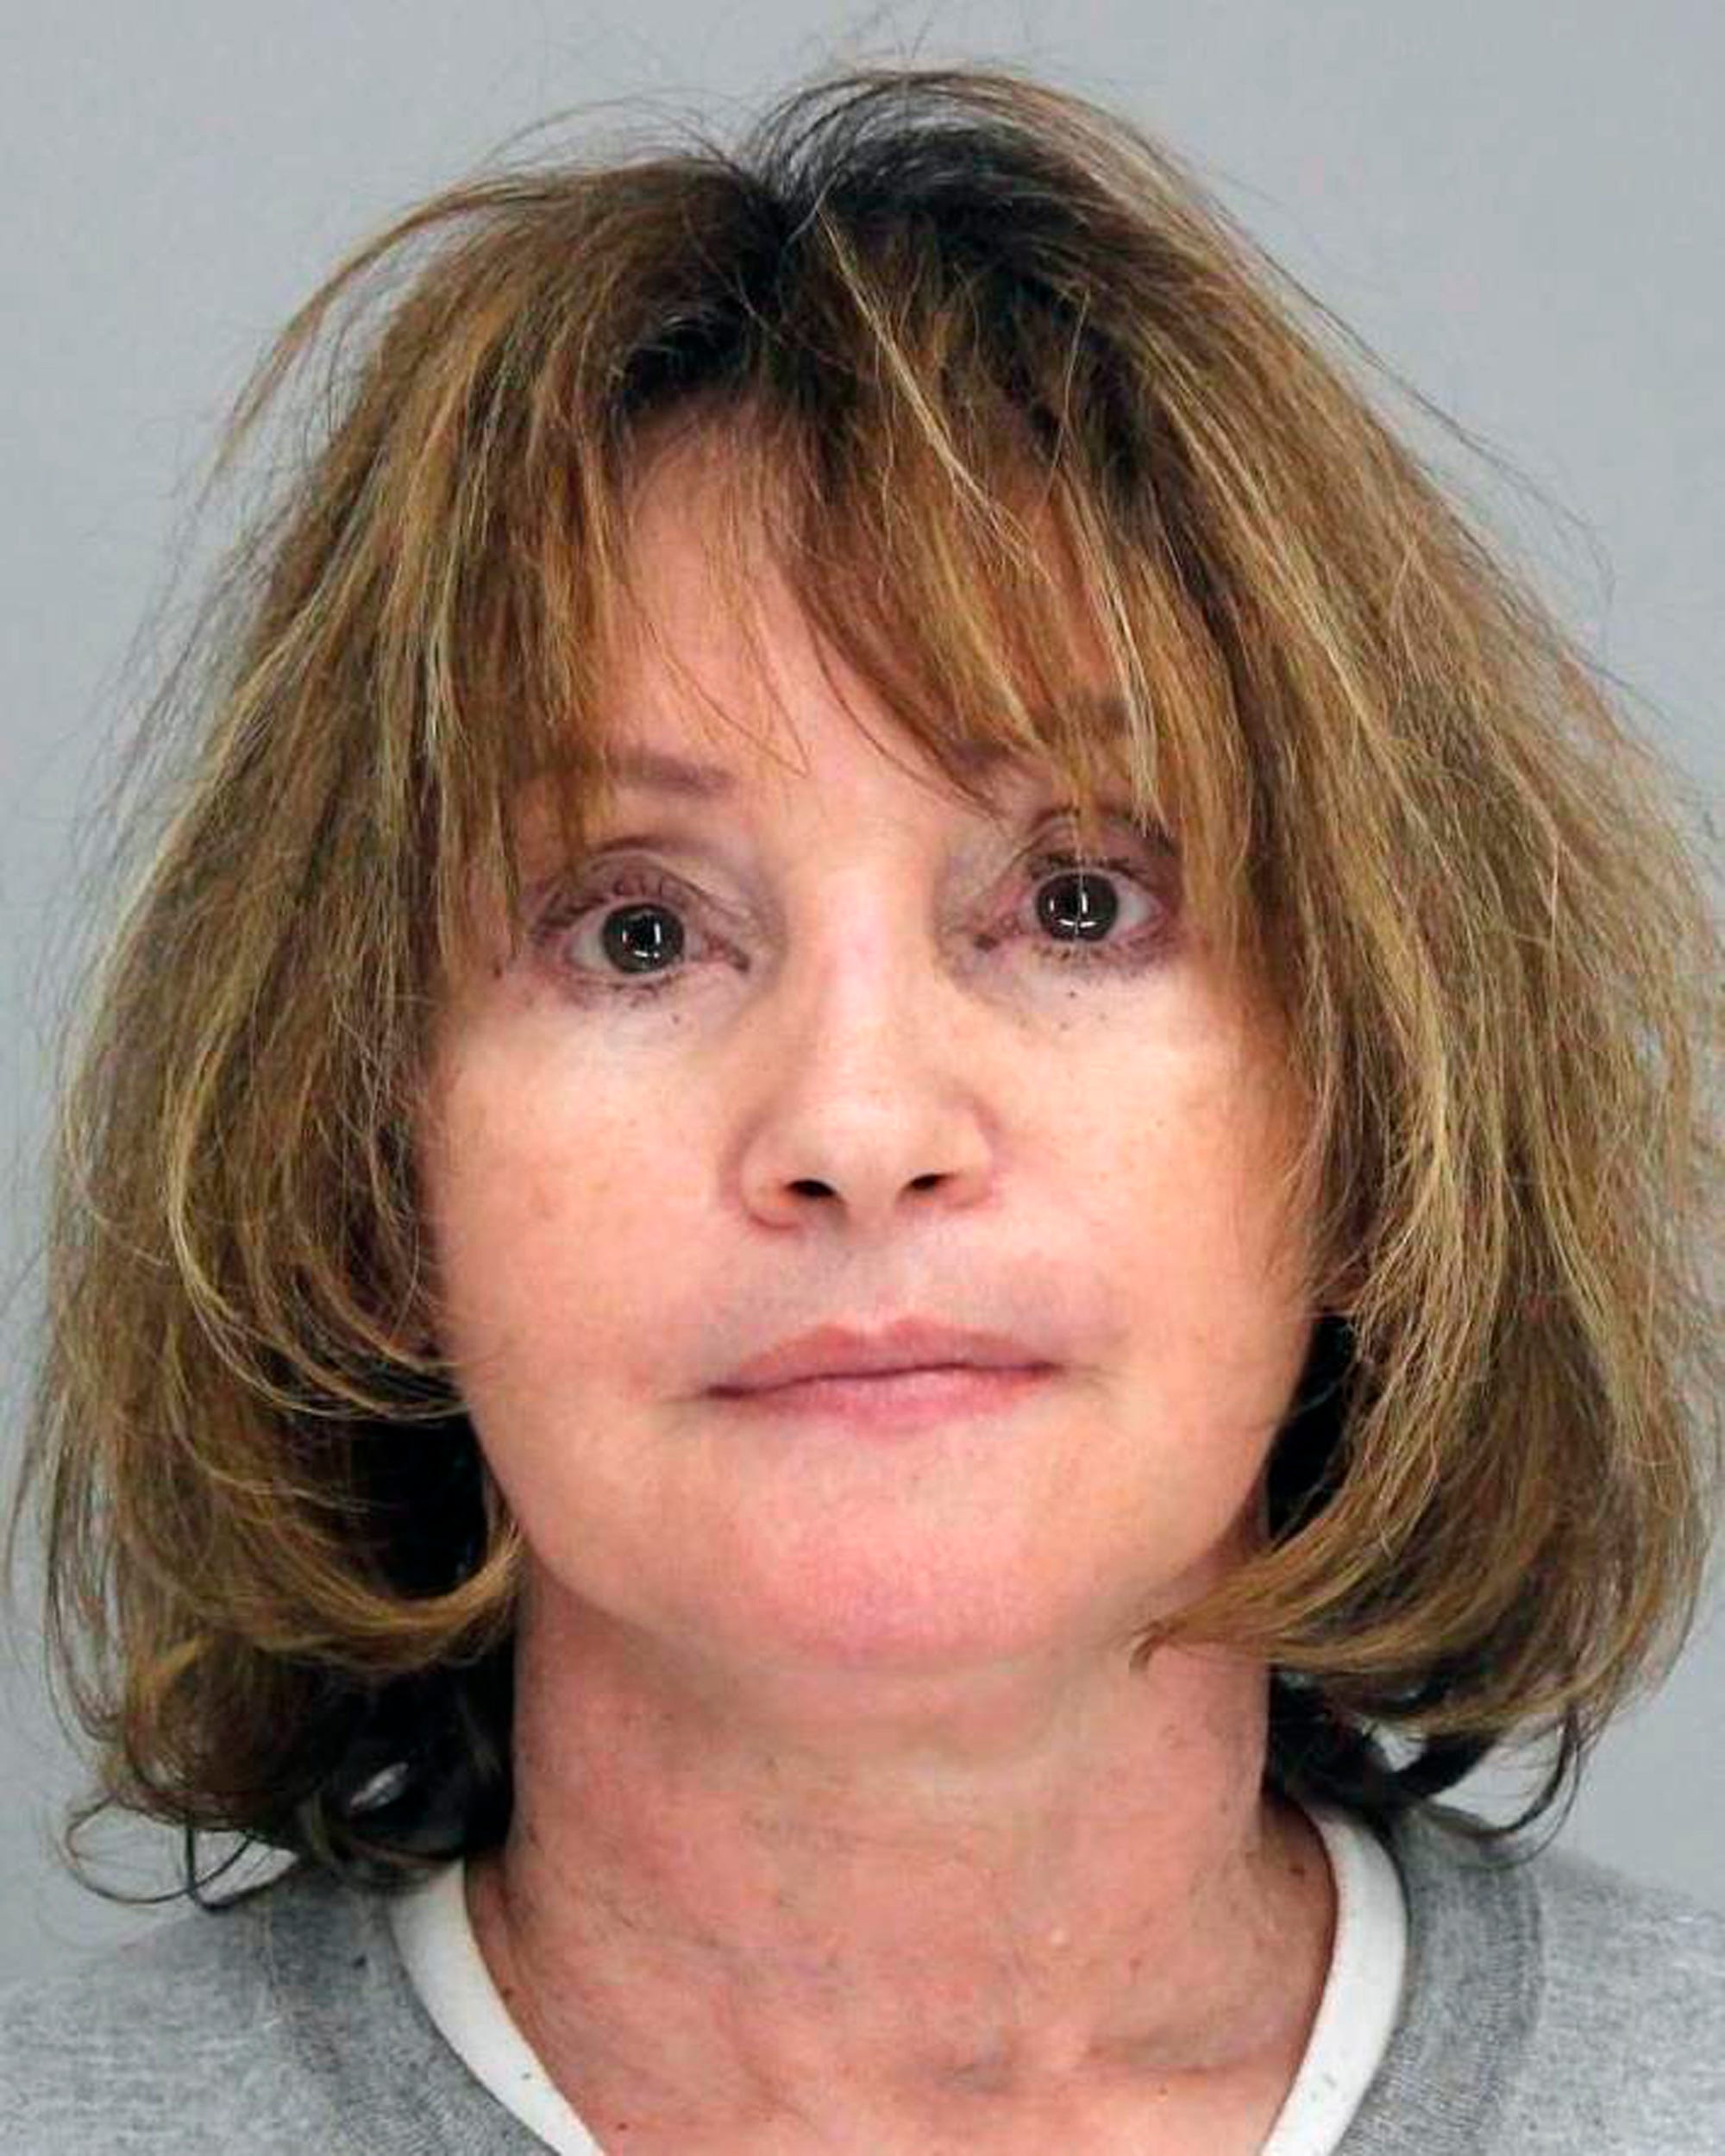 texas-day-care-owner-arrested-on-charges-she-kept-kids-tied-to-car